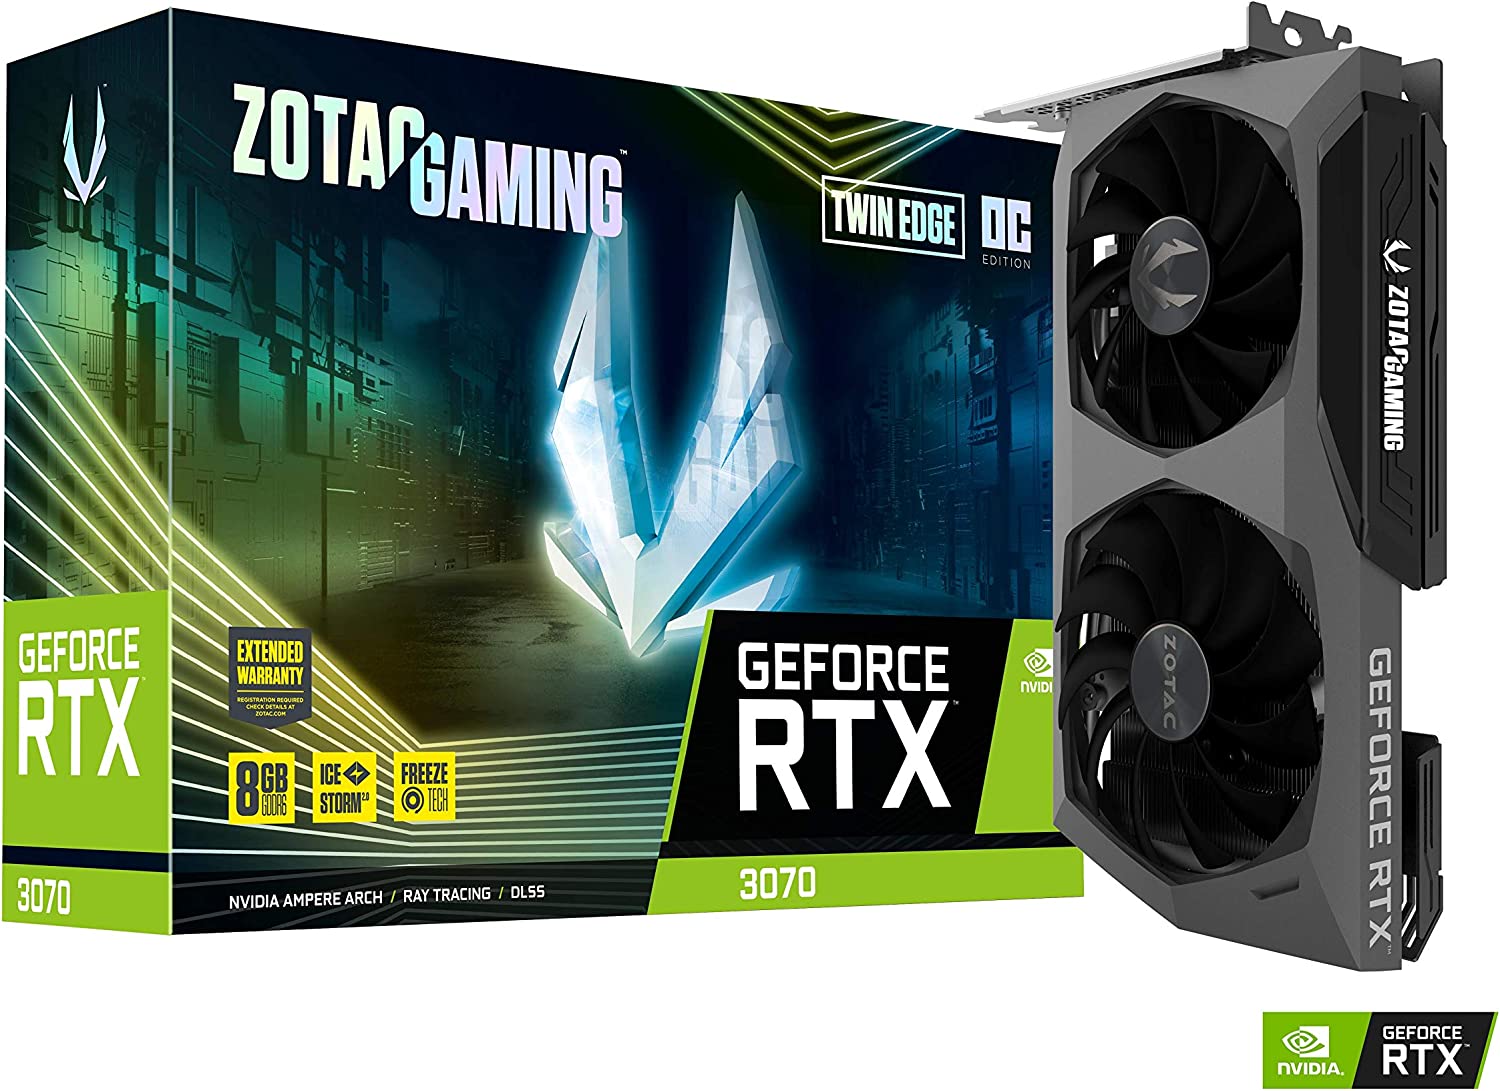 ZOTAC Gaming GeForce RTX 3070 Twin Edge OC Low Hash Rate 8GB GDDR6 256-bit 14 Gbps PCIE 4.0 Gaming Graphics Card, IceStorm 2.0 Advanced Cooling